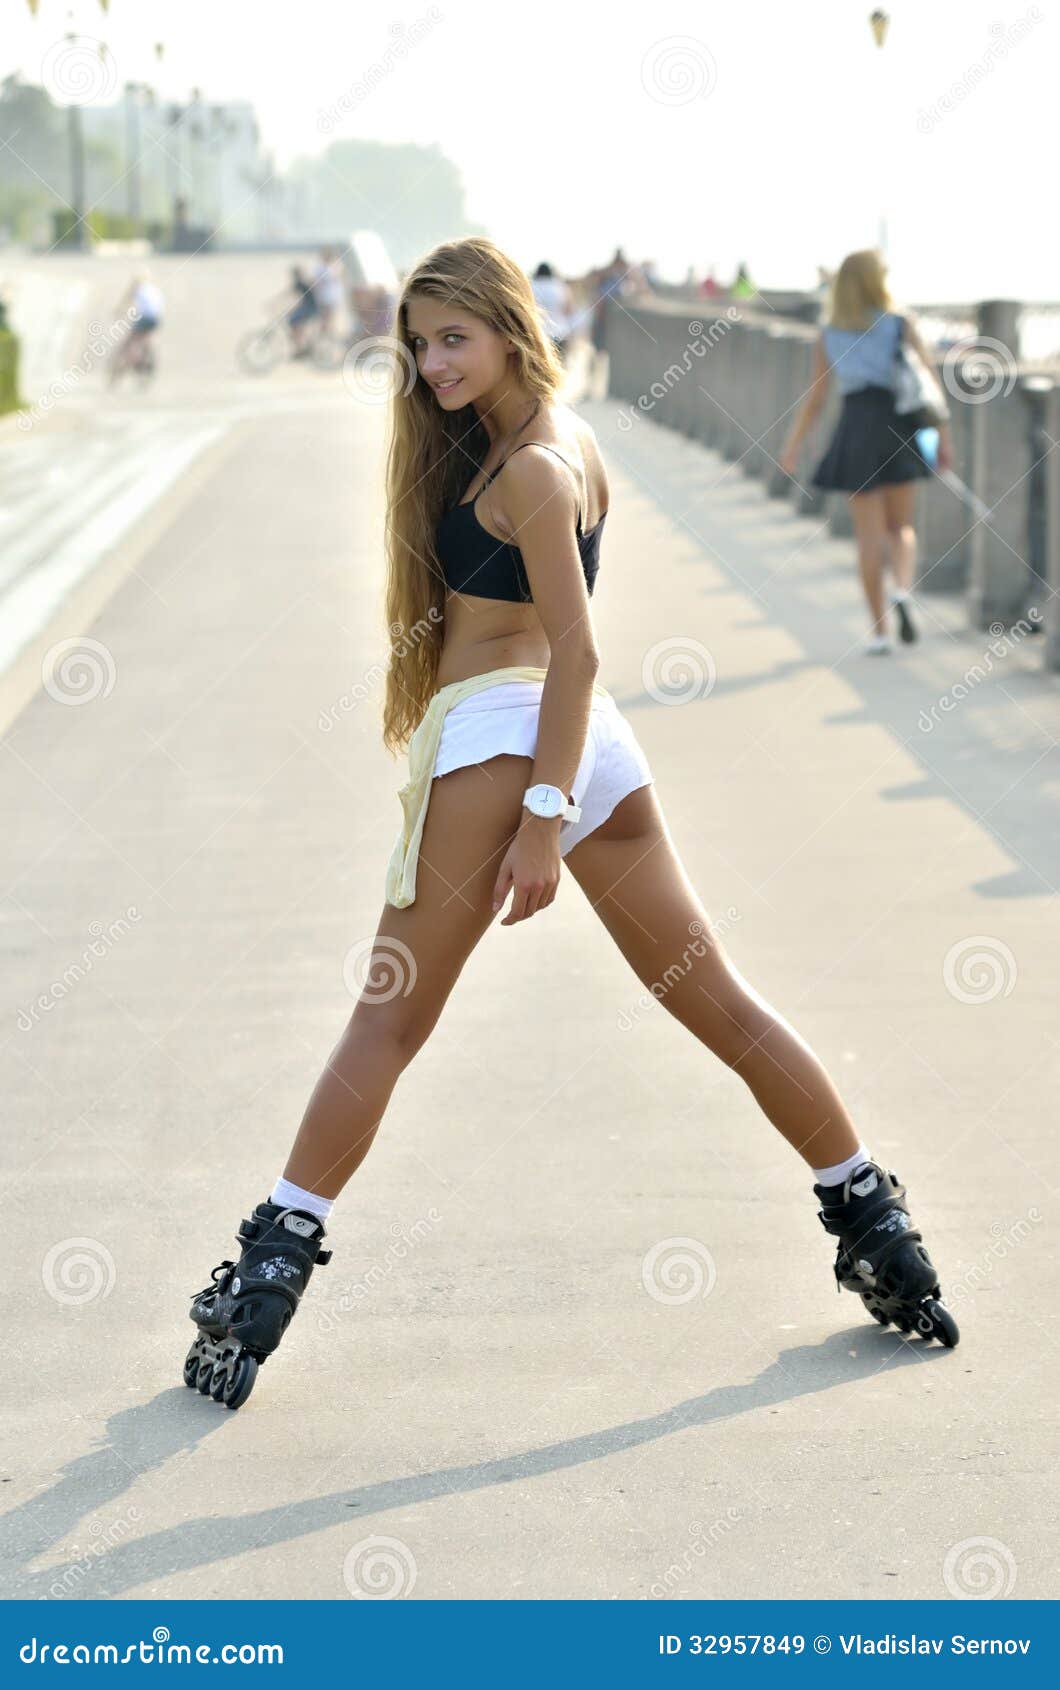 Girl Roller-skating in the Street Stock Image - Image of individual,  muscular: 32957849